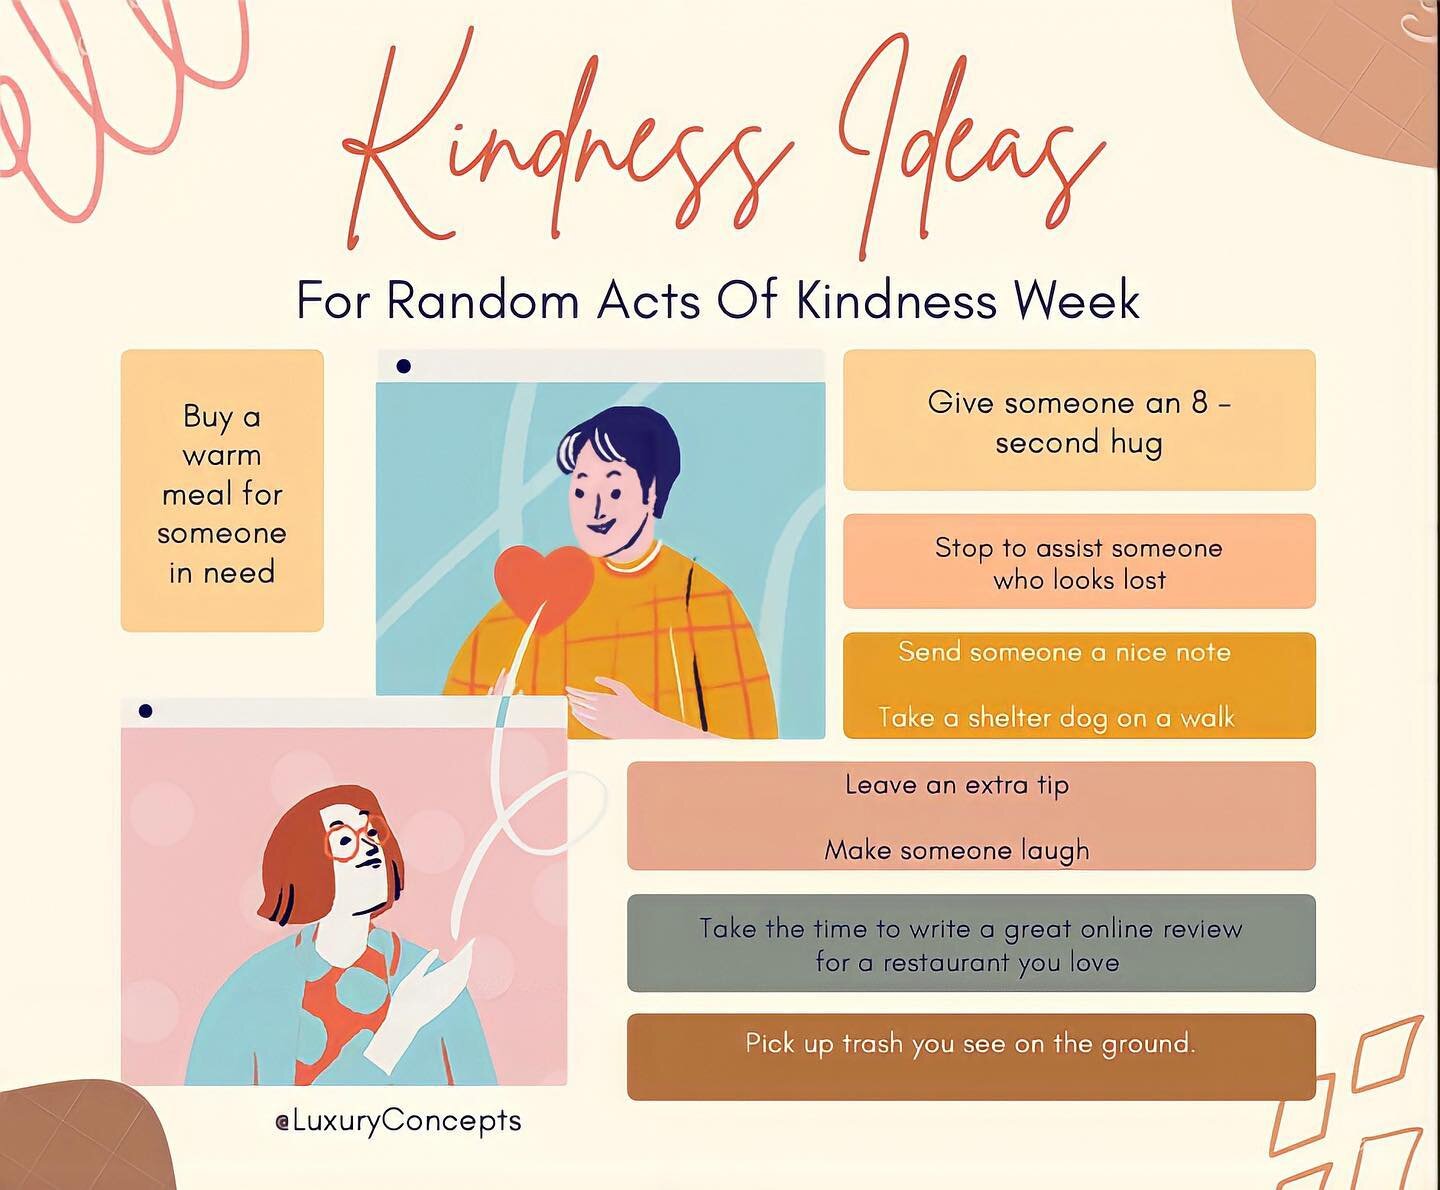 Today is Random Acts of Kindness Day and we're here to help you spread the smiles today and everyday. You'll be surprised how far a kind gesture can go.❤️
&bull;
&bull;
&bull;
&bull;
&bull;
&bull;
&bull;
&bull;
&bull;
&bull;
&bull;
#bekind #kindness 